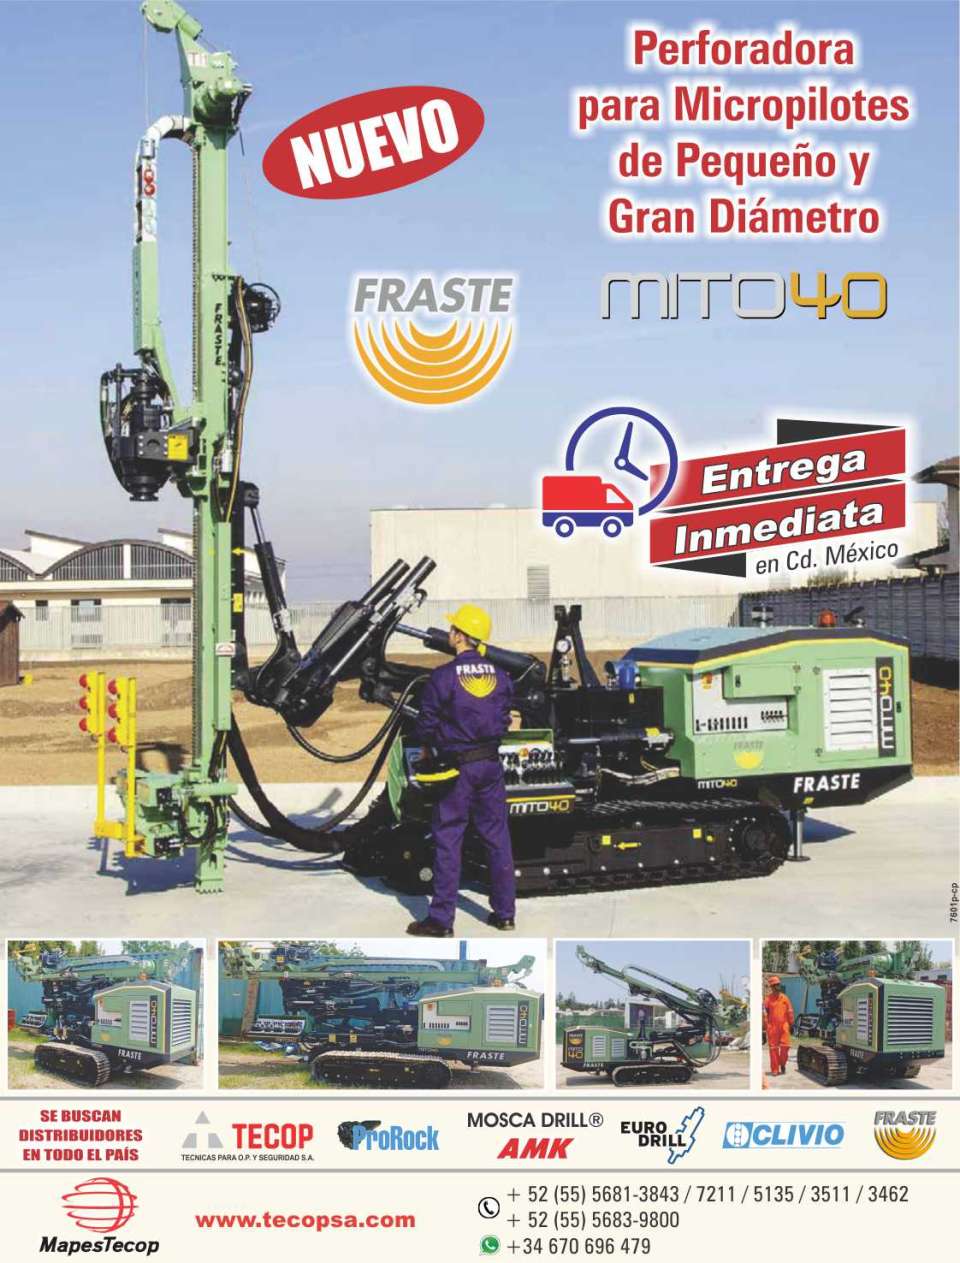 New Fraste drilling rig for micropiles of small and large diameter